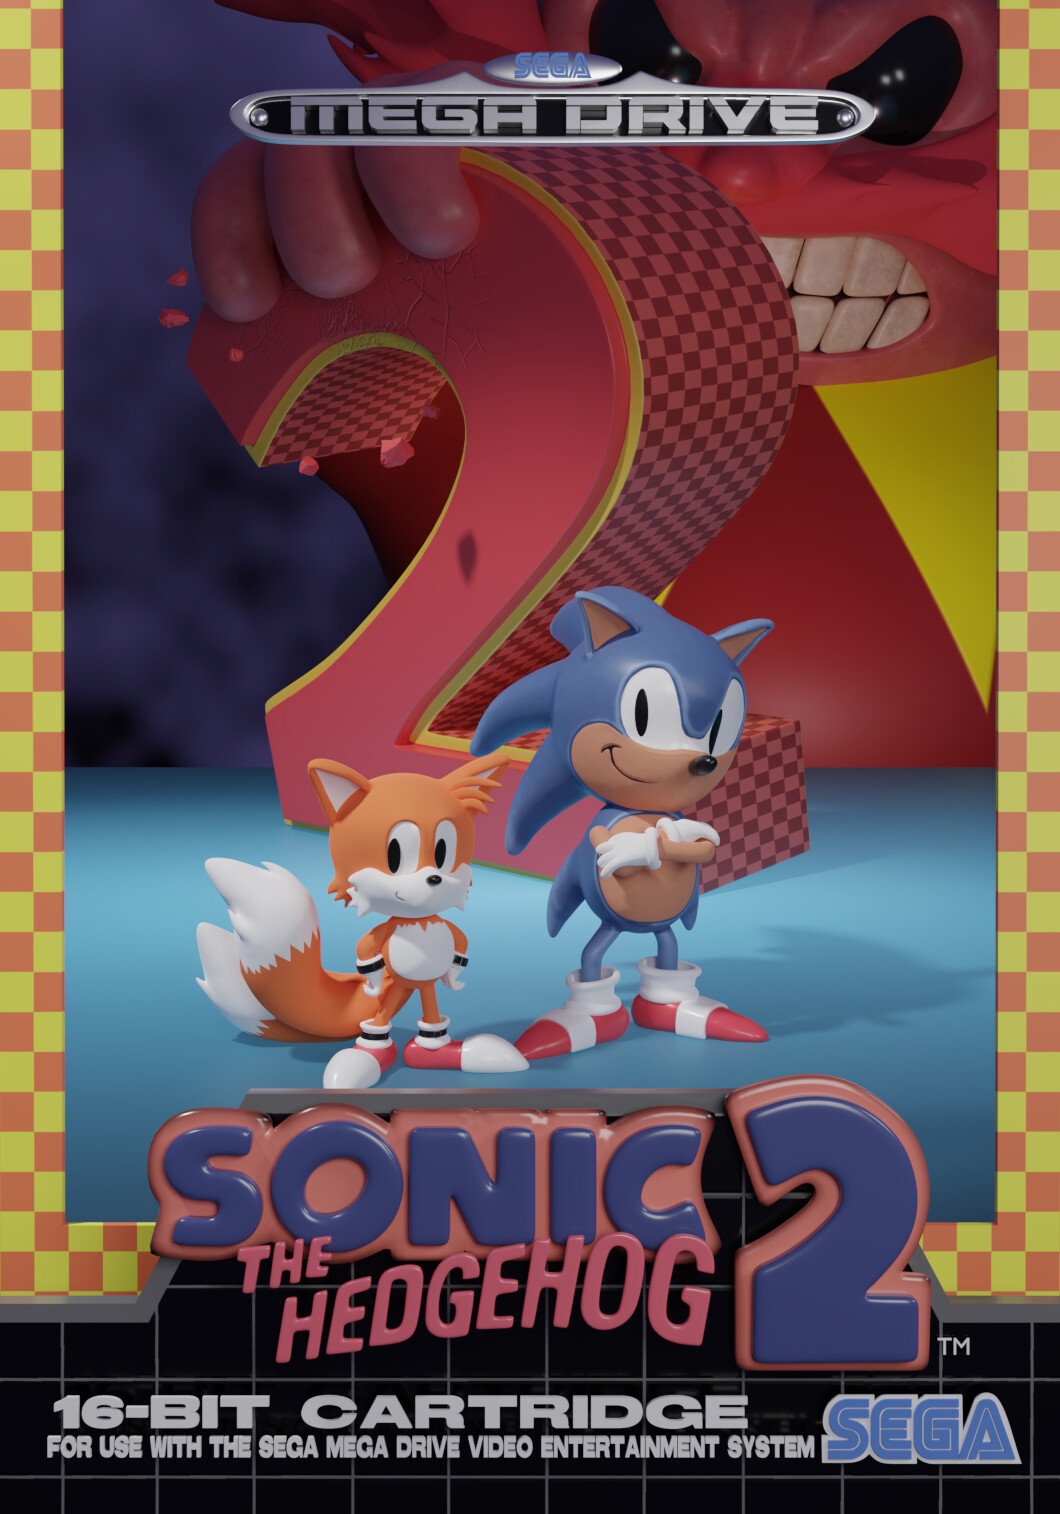 Sonic the Hedgehog 2 - Box Art - Finished Projects - Blender Artists  Community